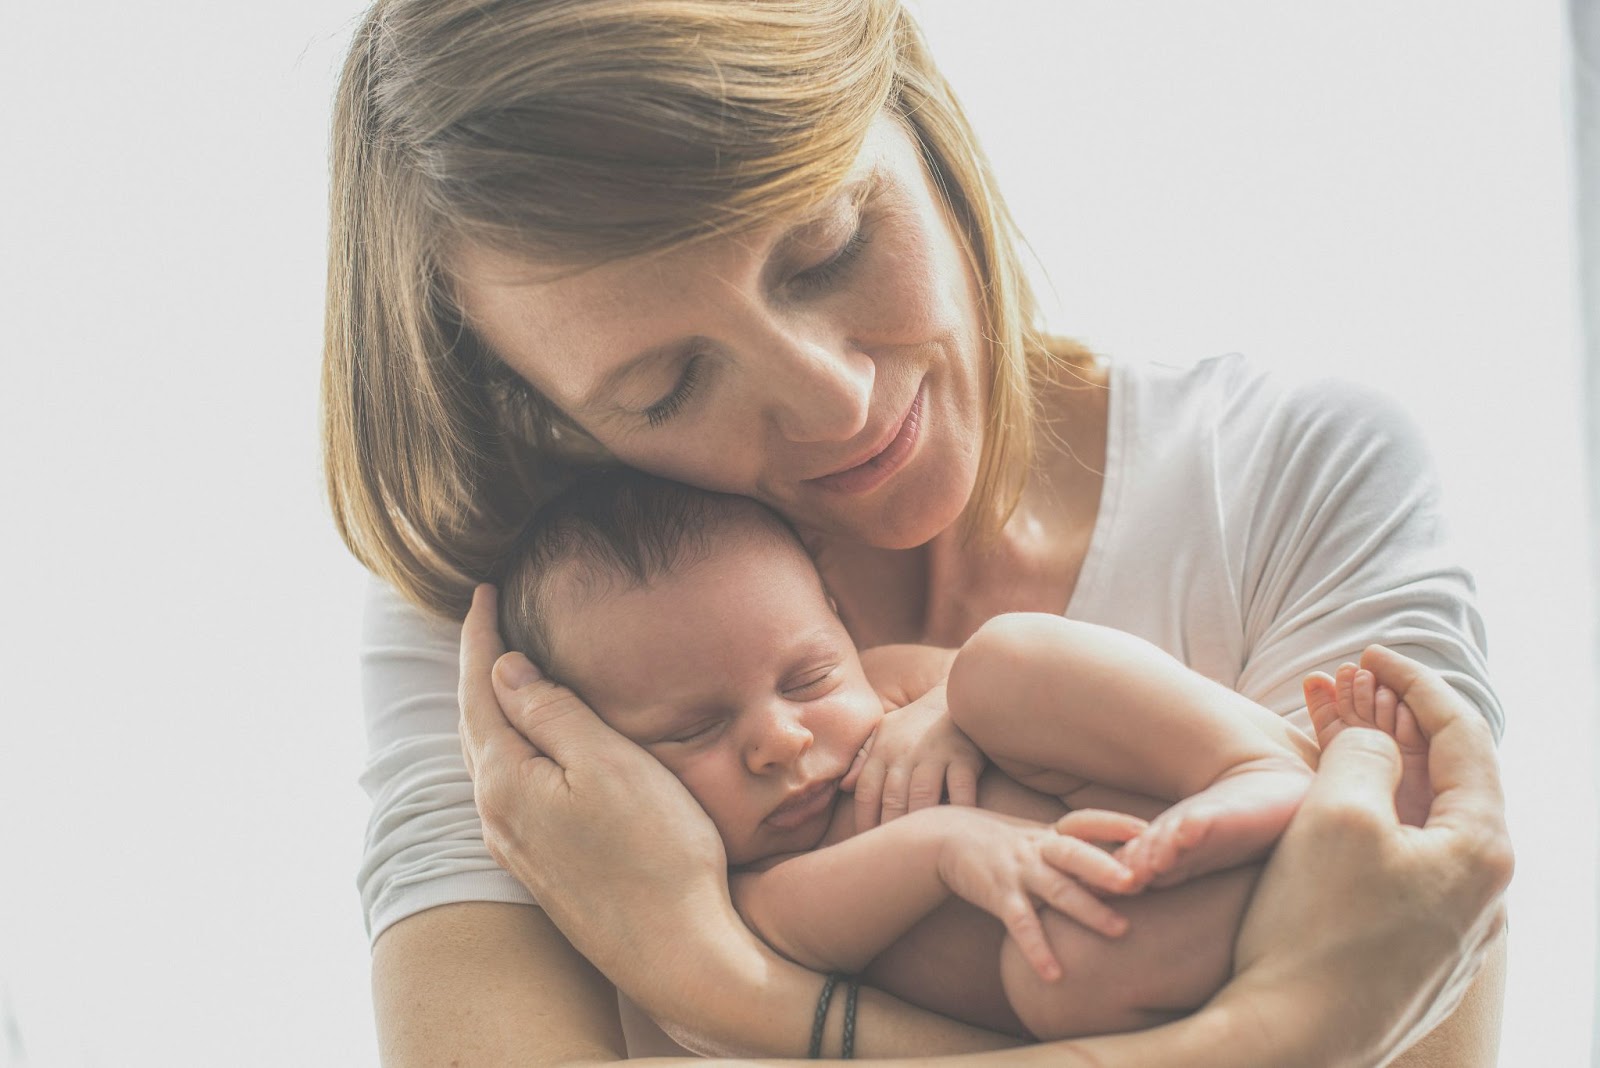 Skin-to-Skin Contact with Your Newborn